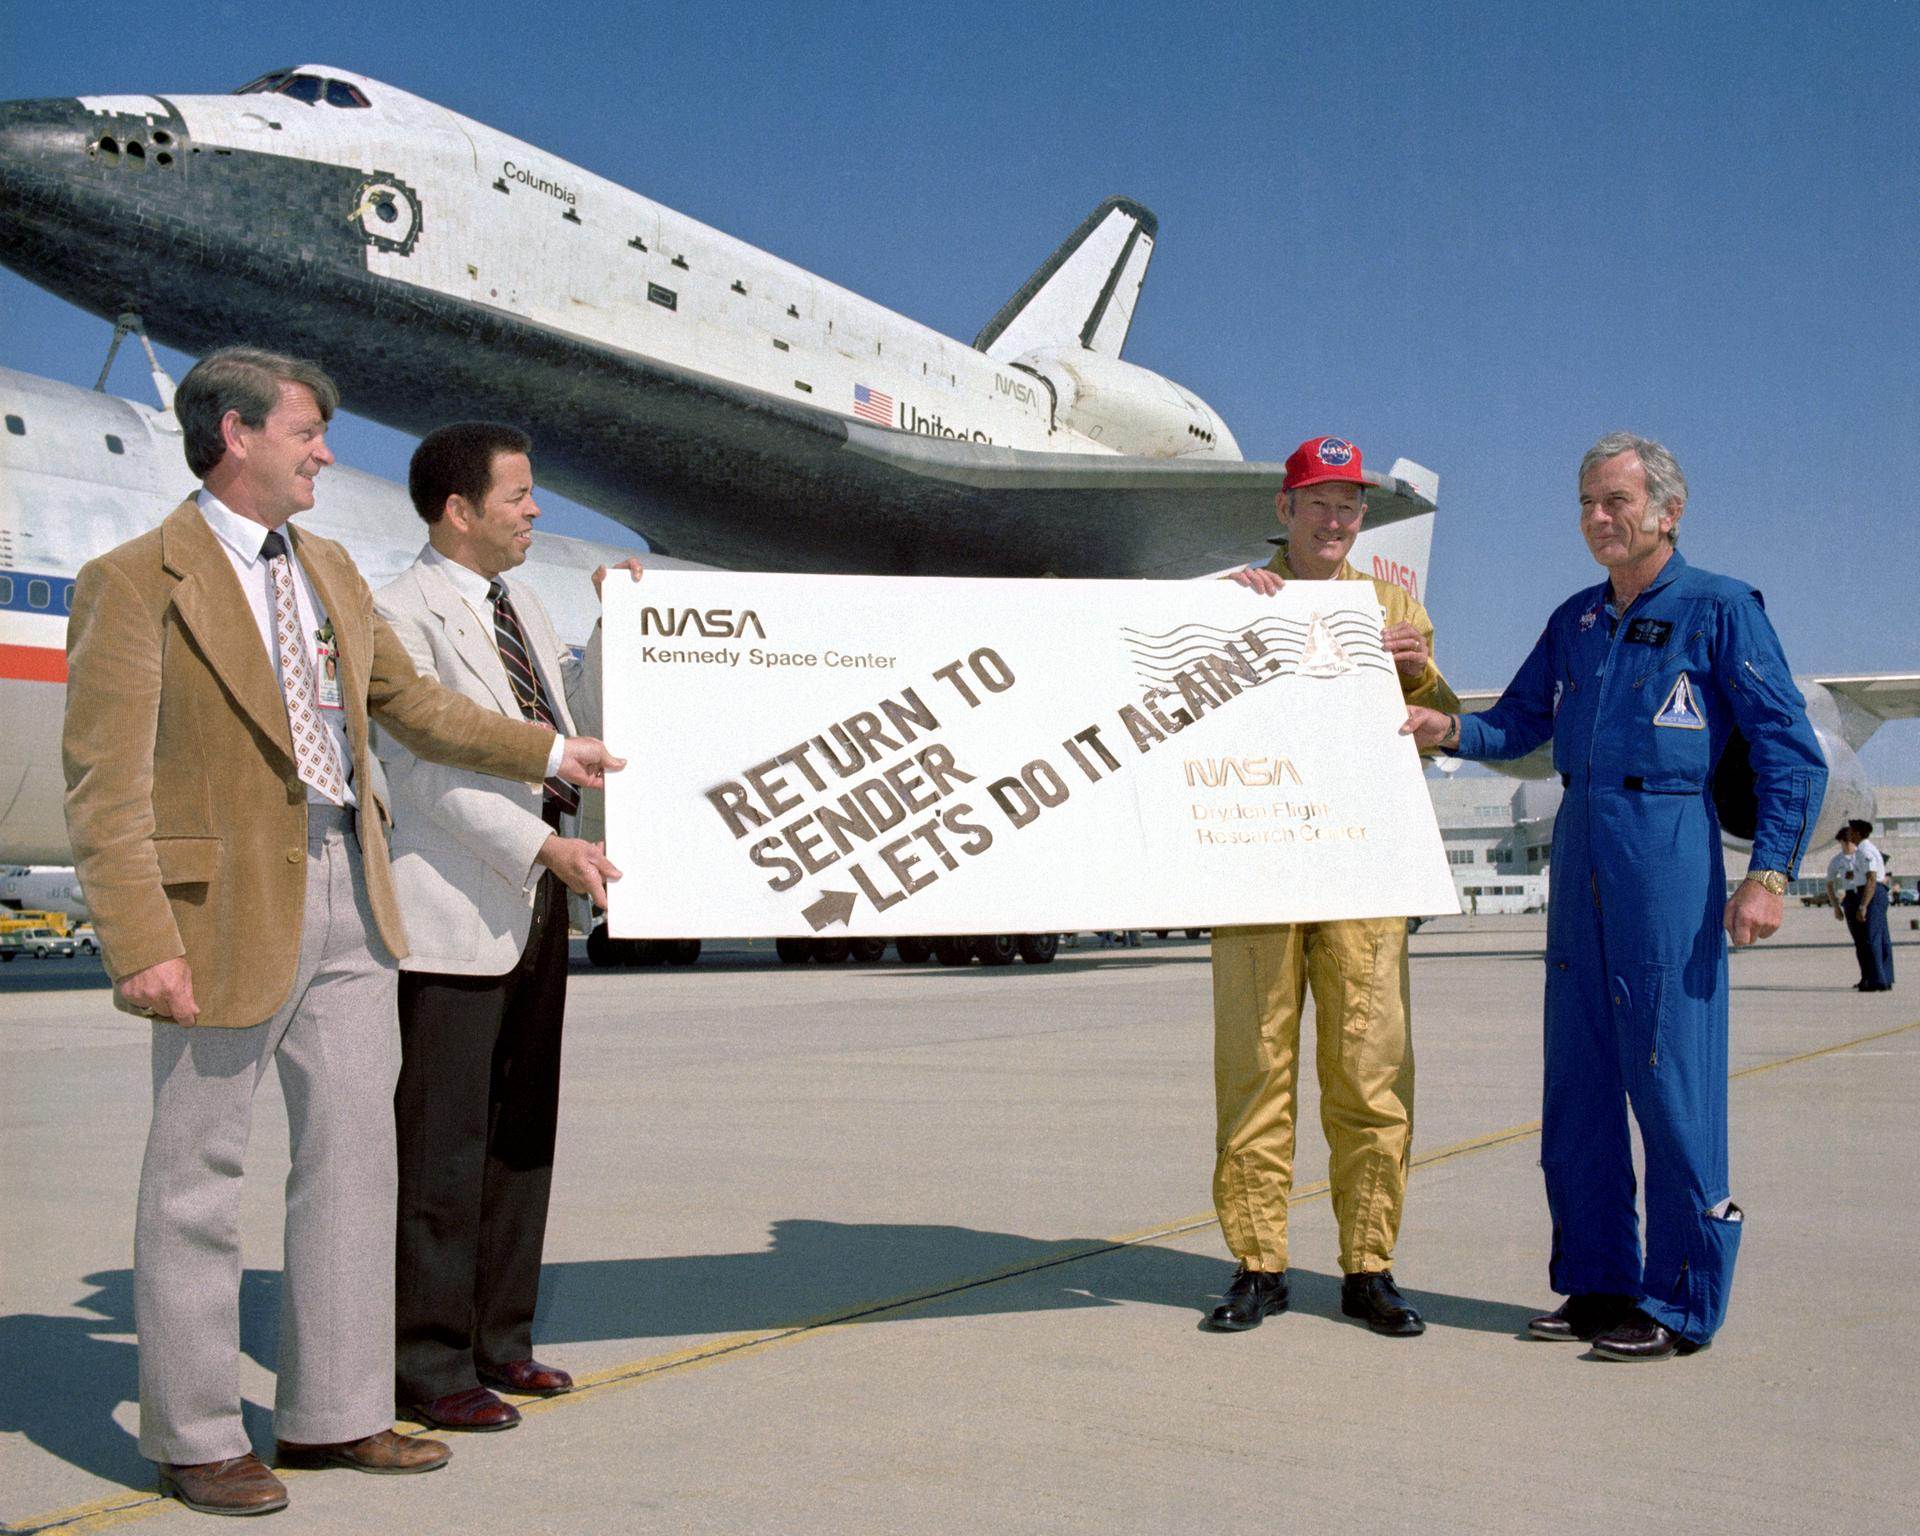 Melvin Burke, Ike Gillam, Fitz Fulton, and Deke Slayton give the Space Shuttle Columbia a humorous sendoff before it's ferry flight back to KSC in Florida